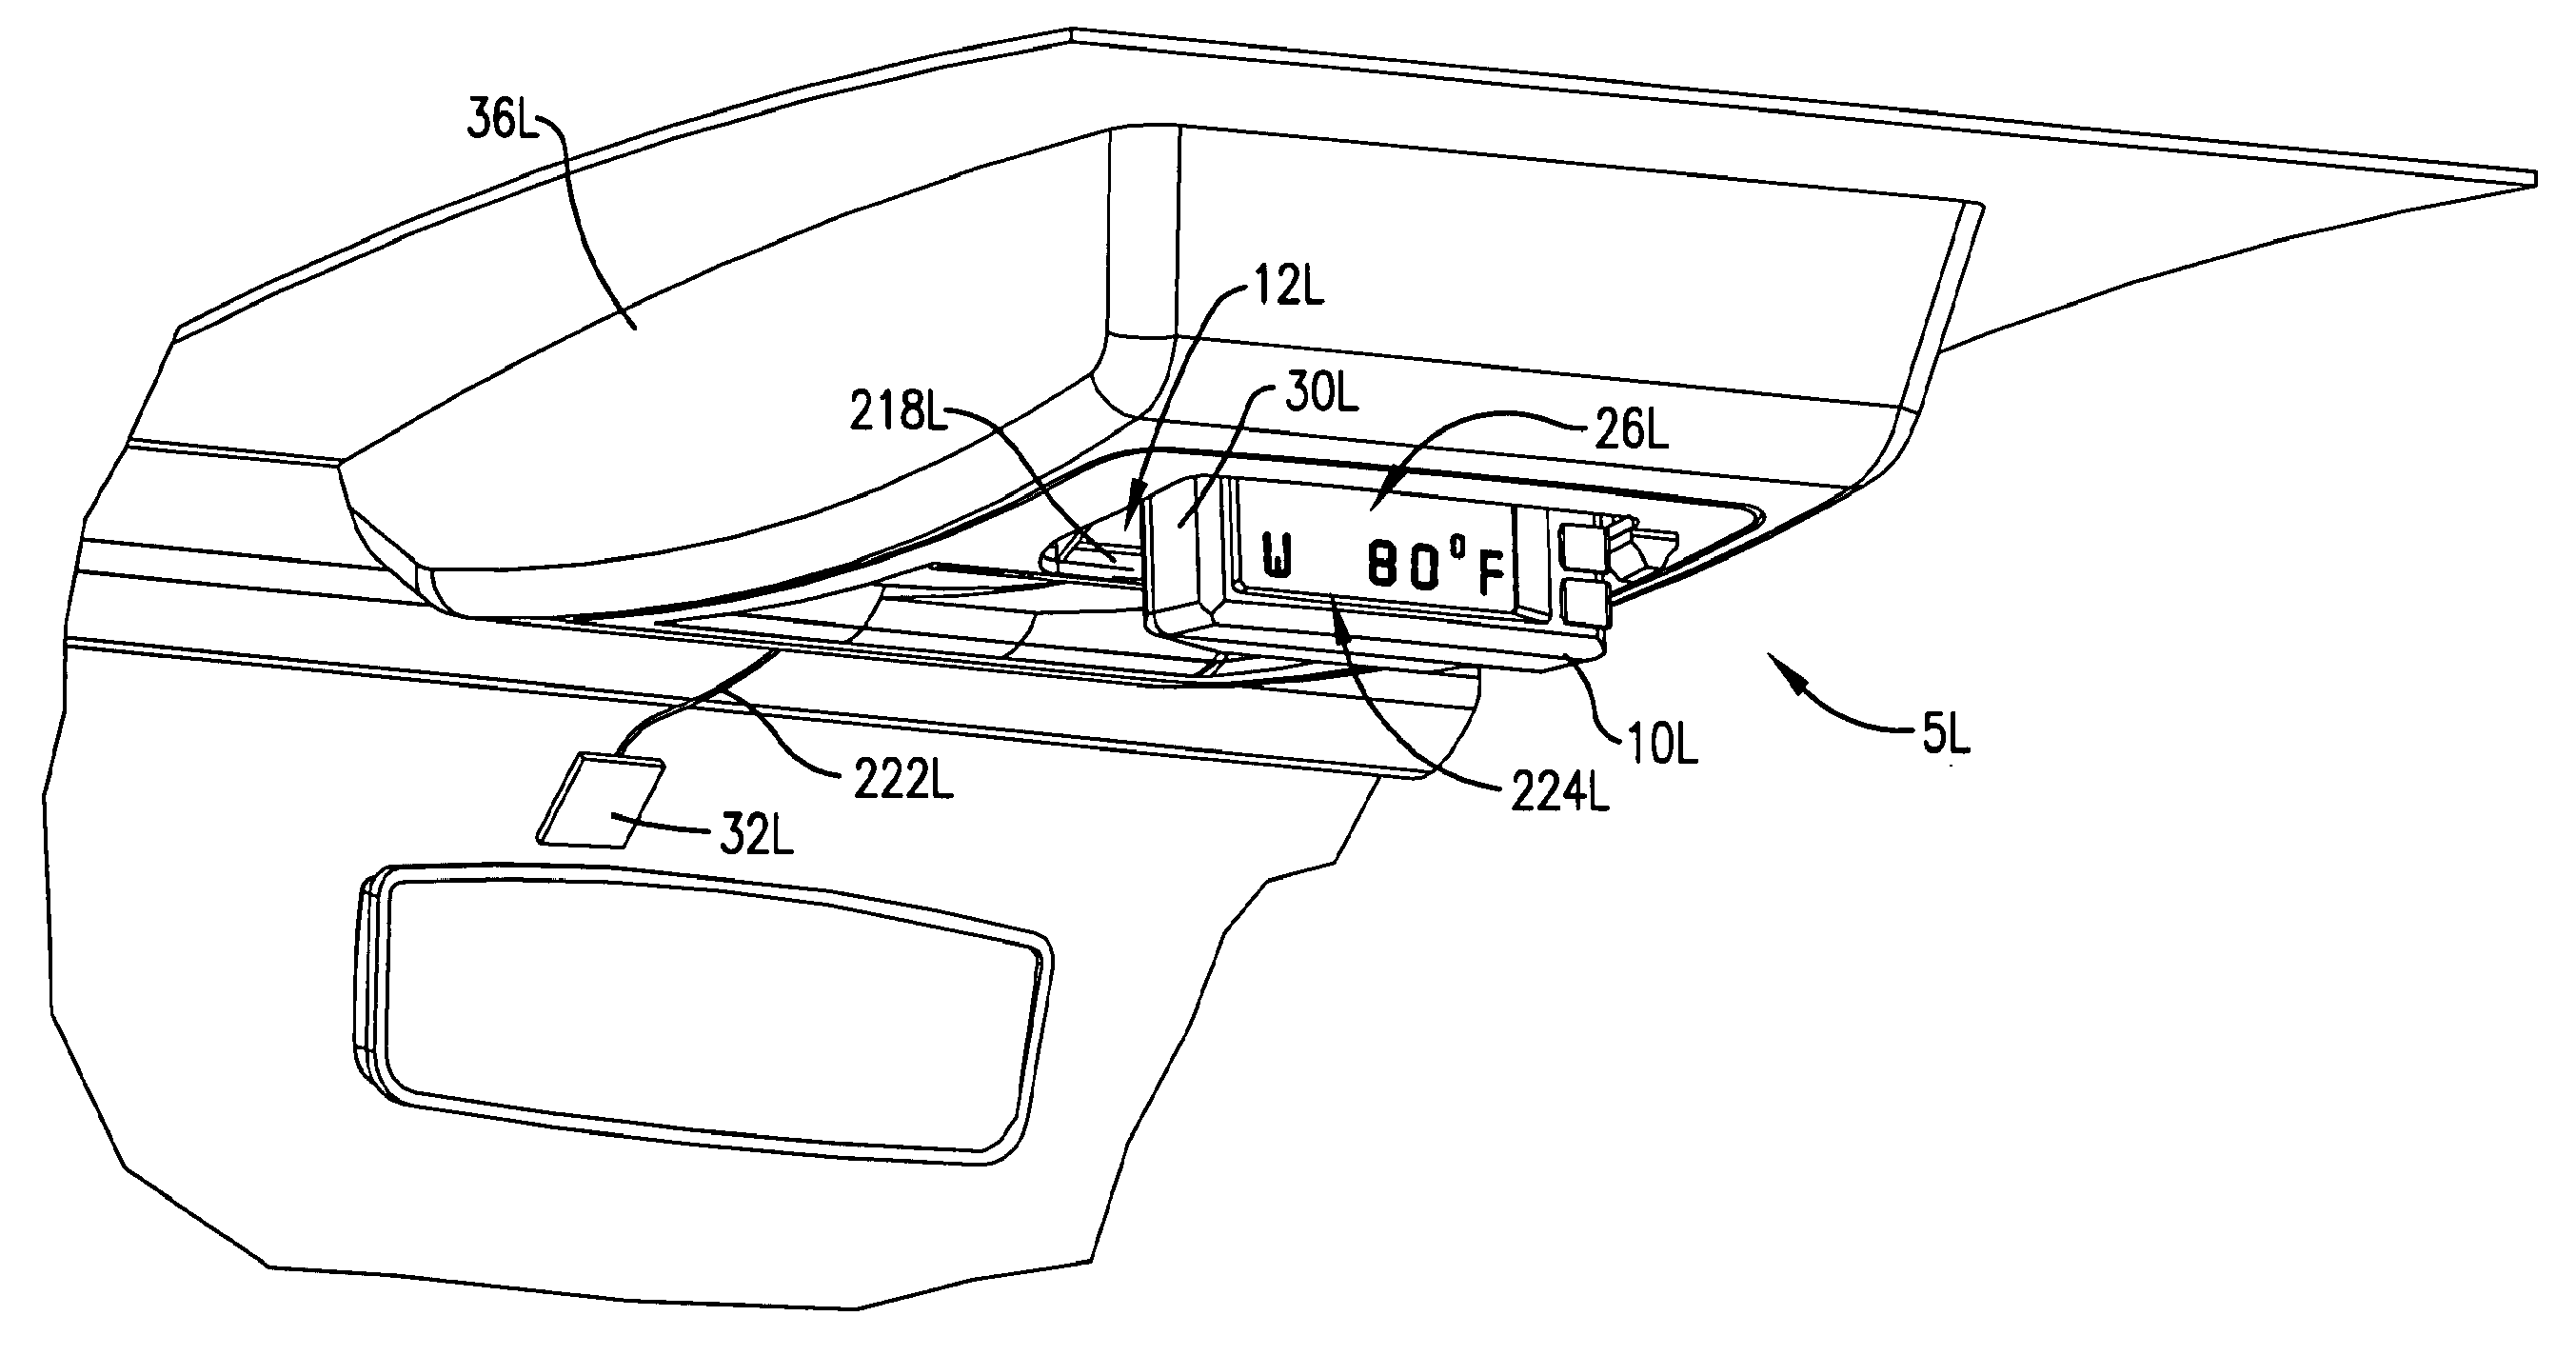 Navigational device for installation in a vehicle and a method for doing same